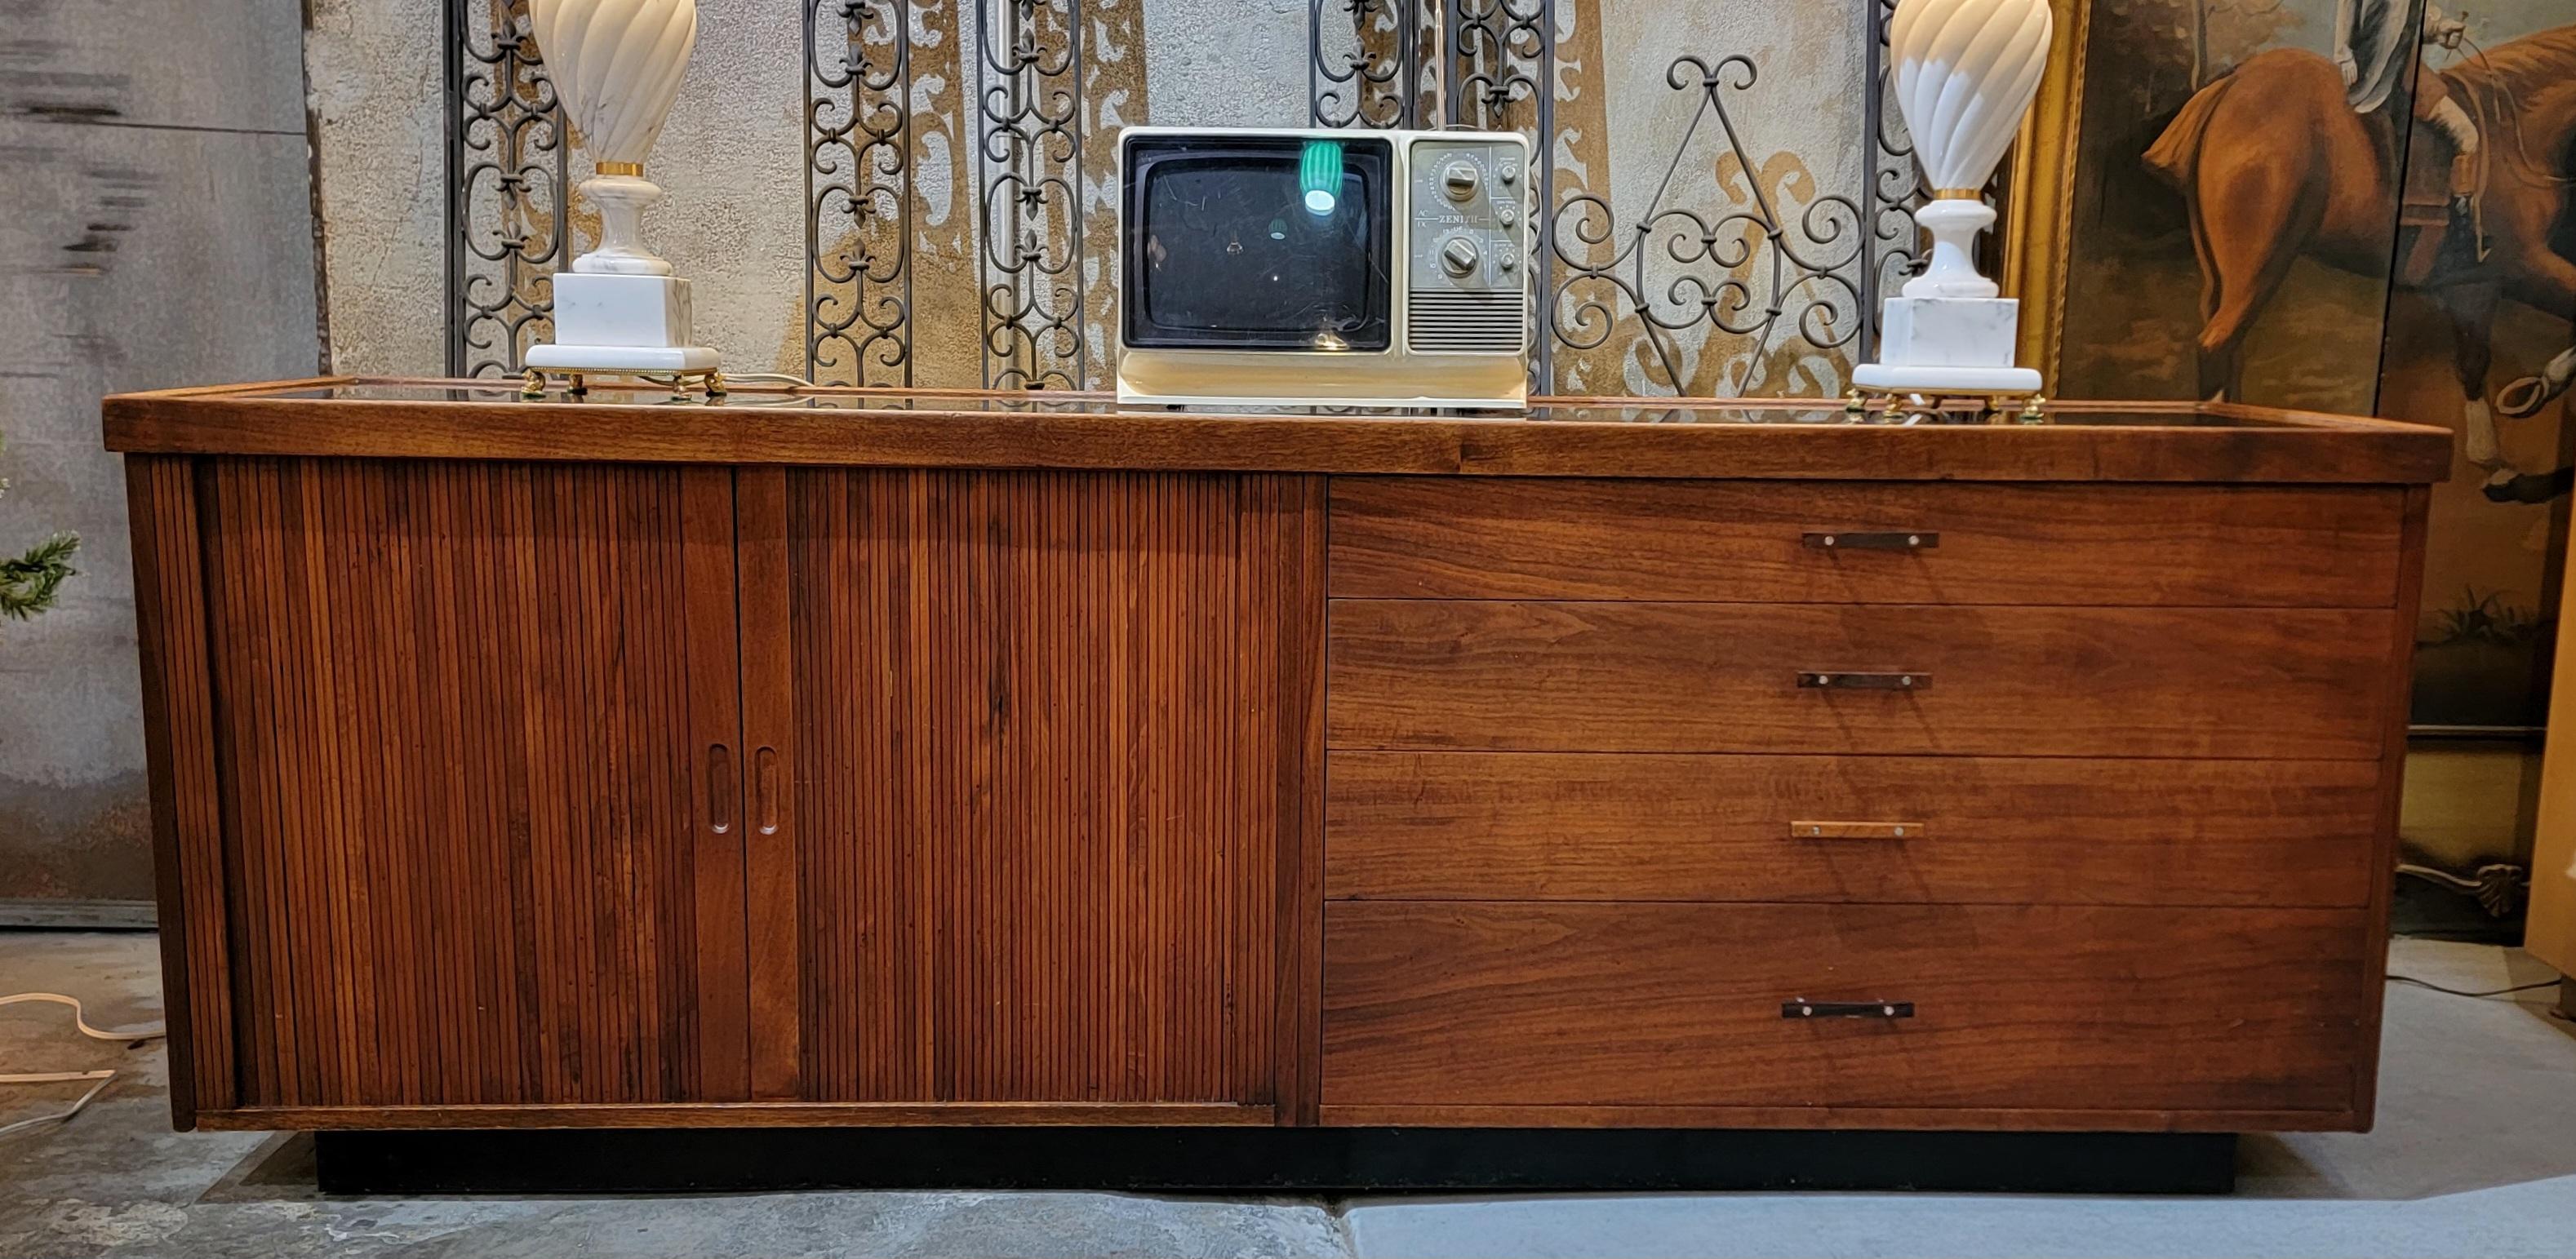 Mid-Century Modern Tambour Door Credenza by Milo Baughman for Glenn of California For Sale